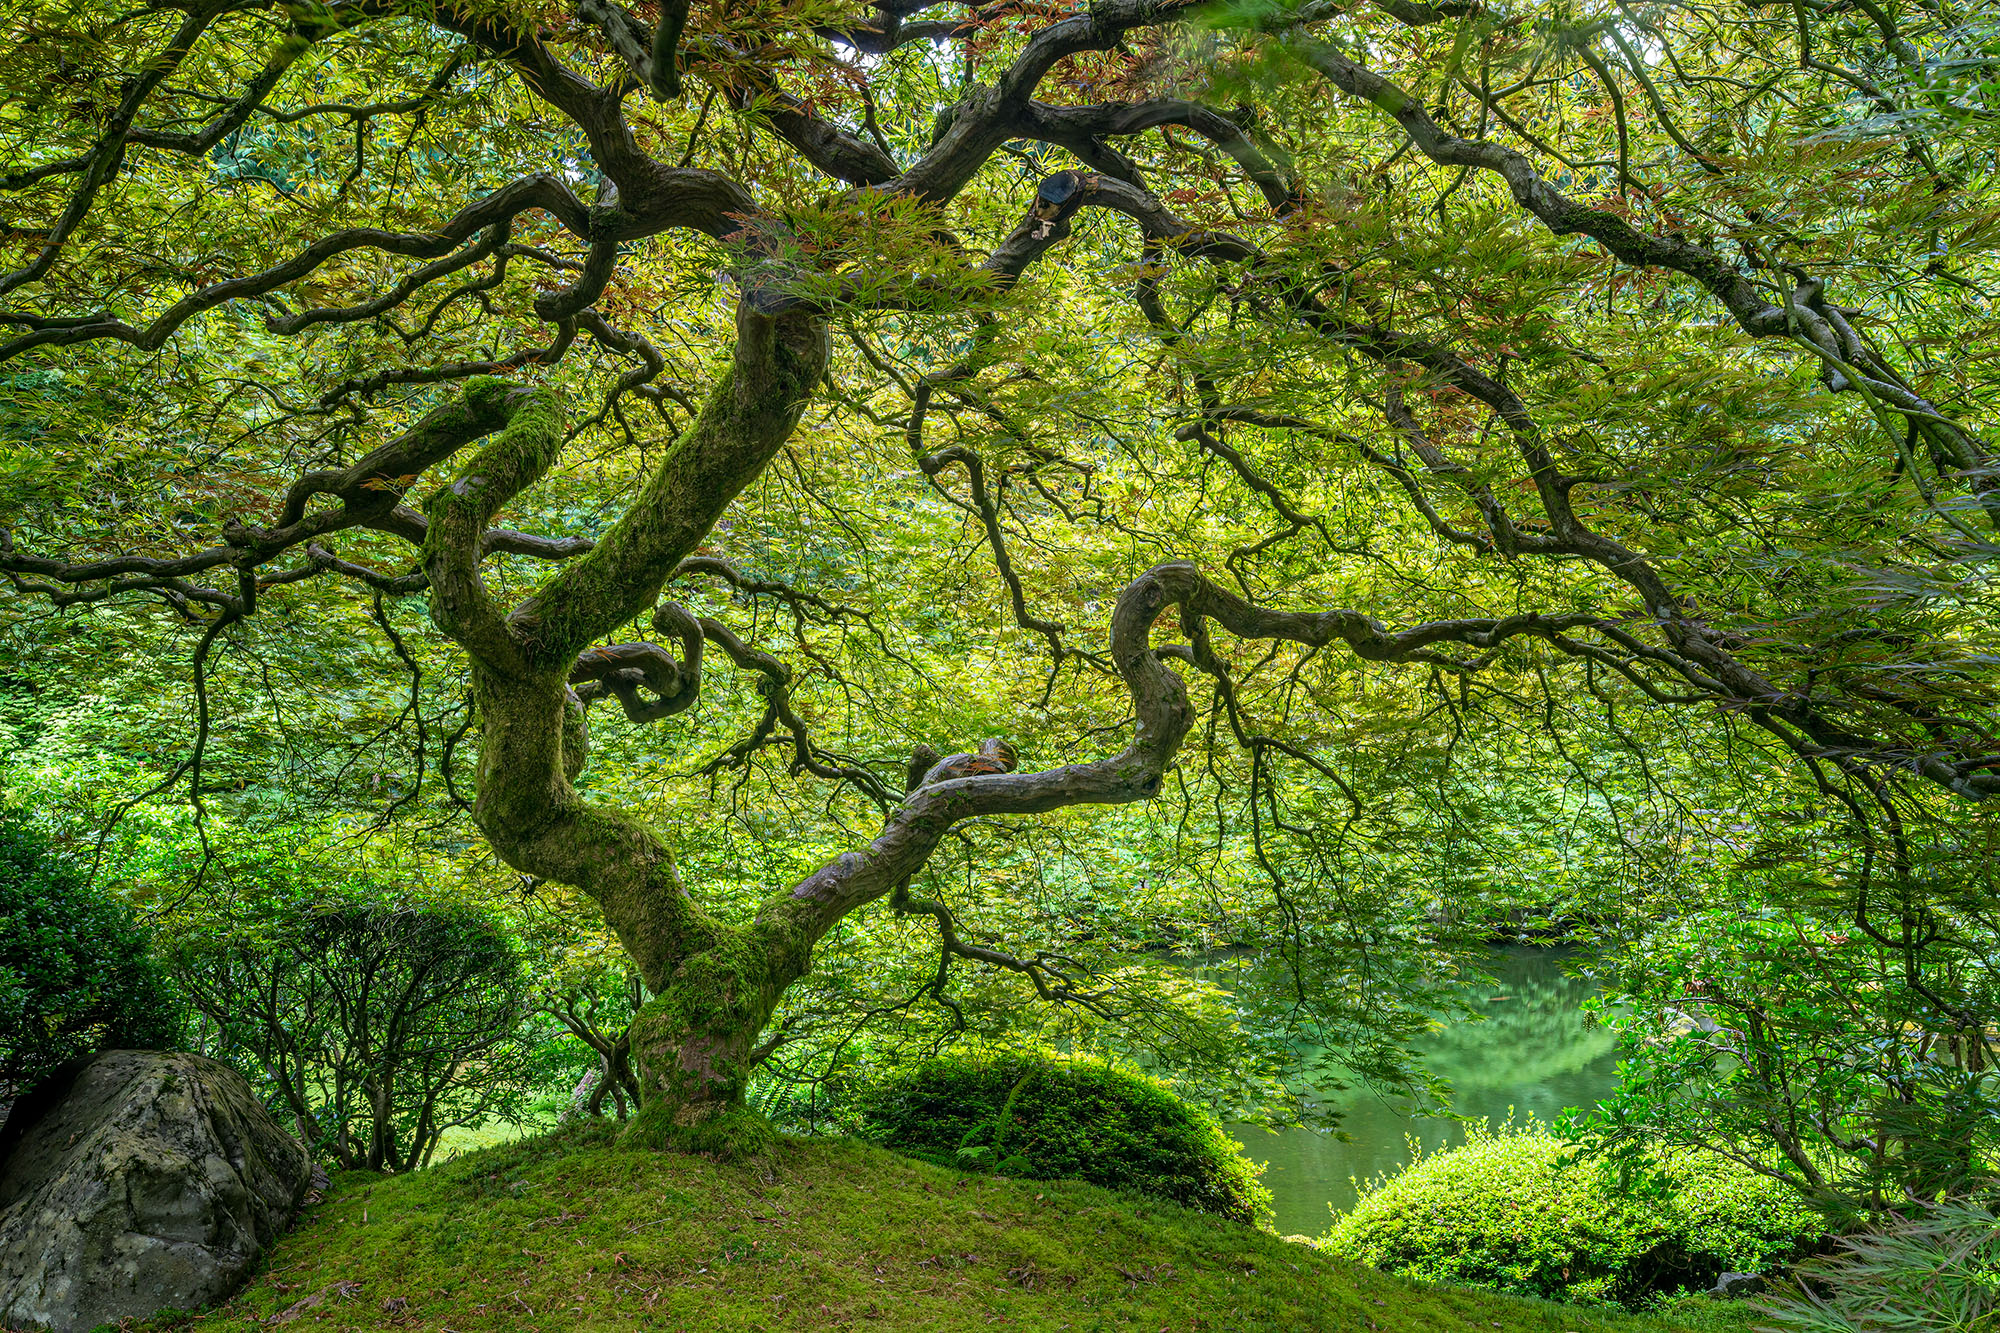 This enchanting image was captured within the lush confines of the Portland Japanese Gardens in Oregon. It showcases the renowned...